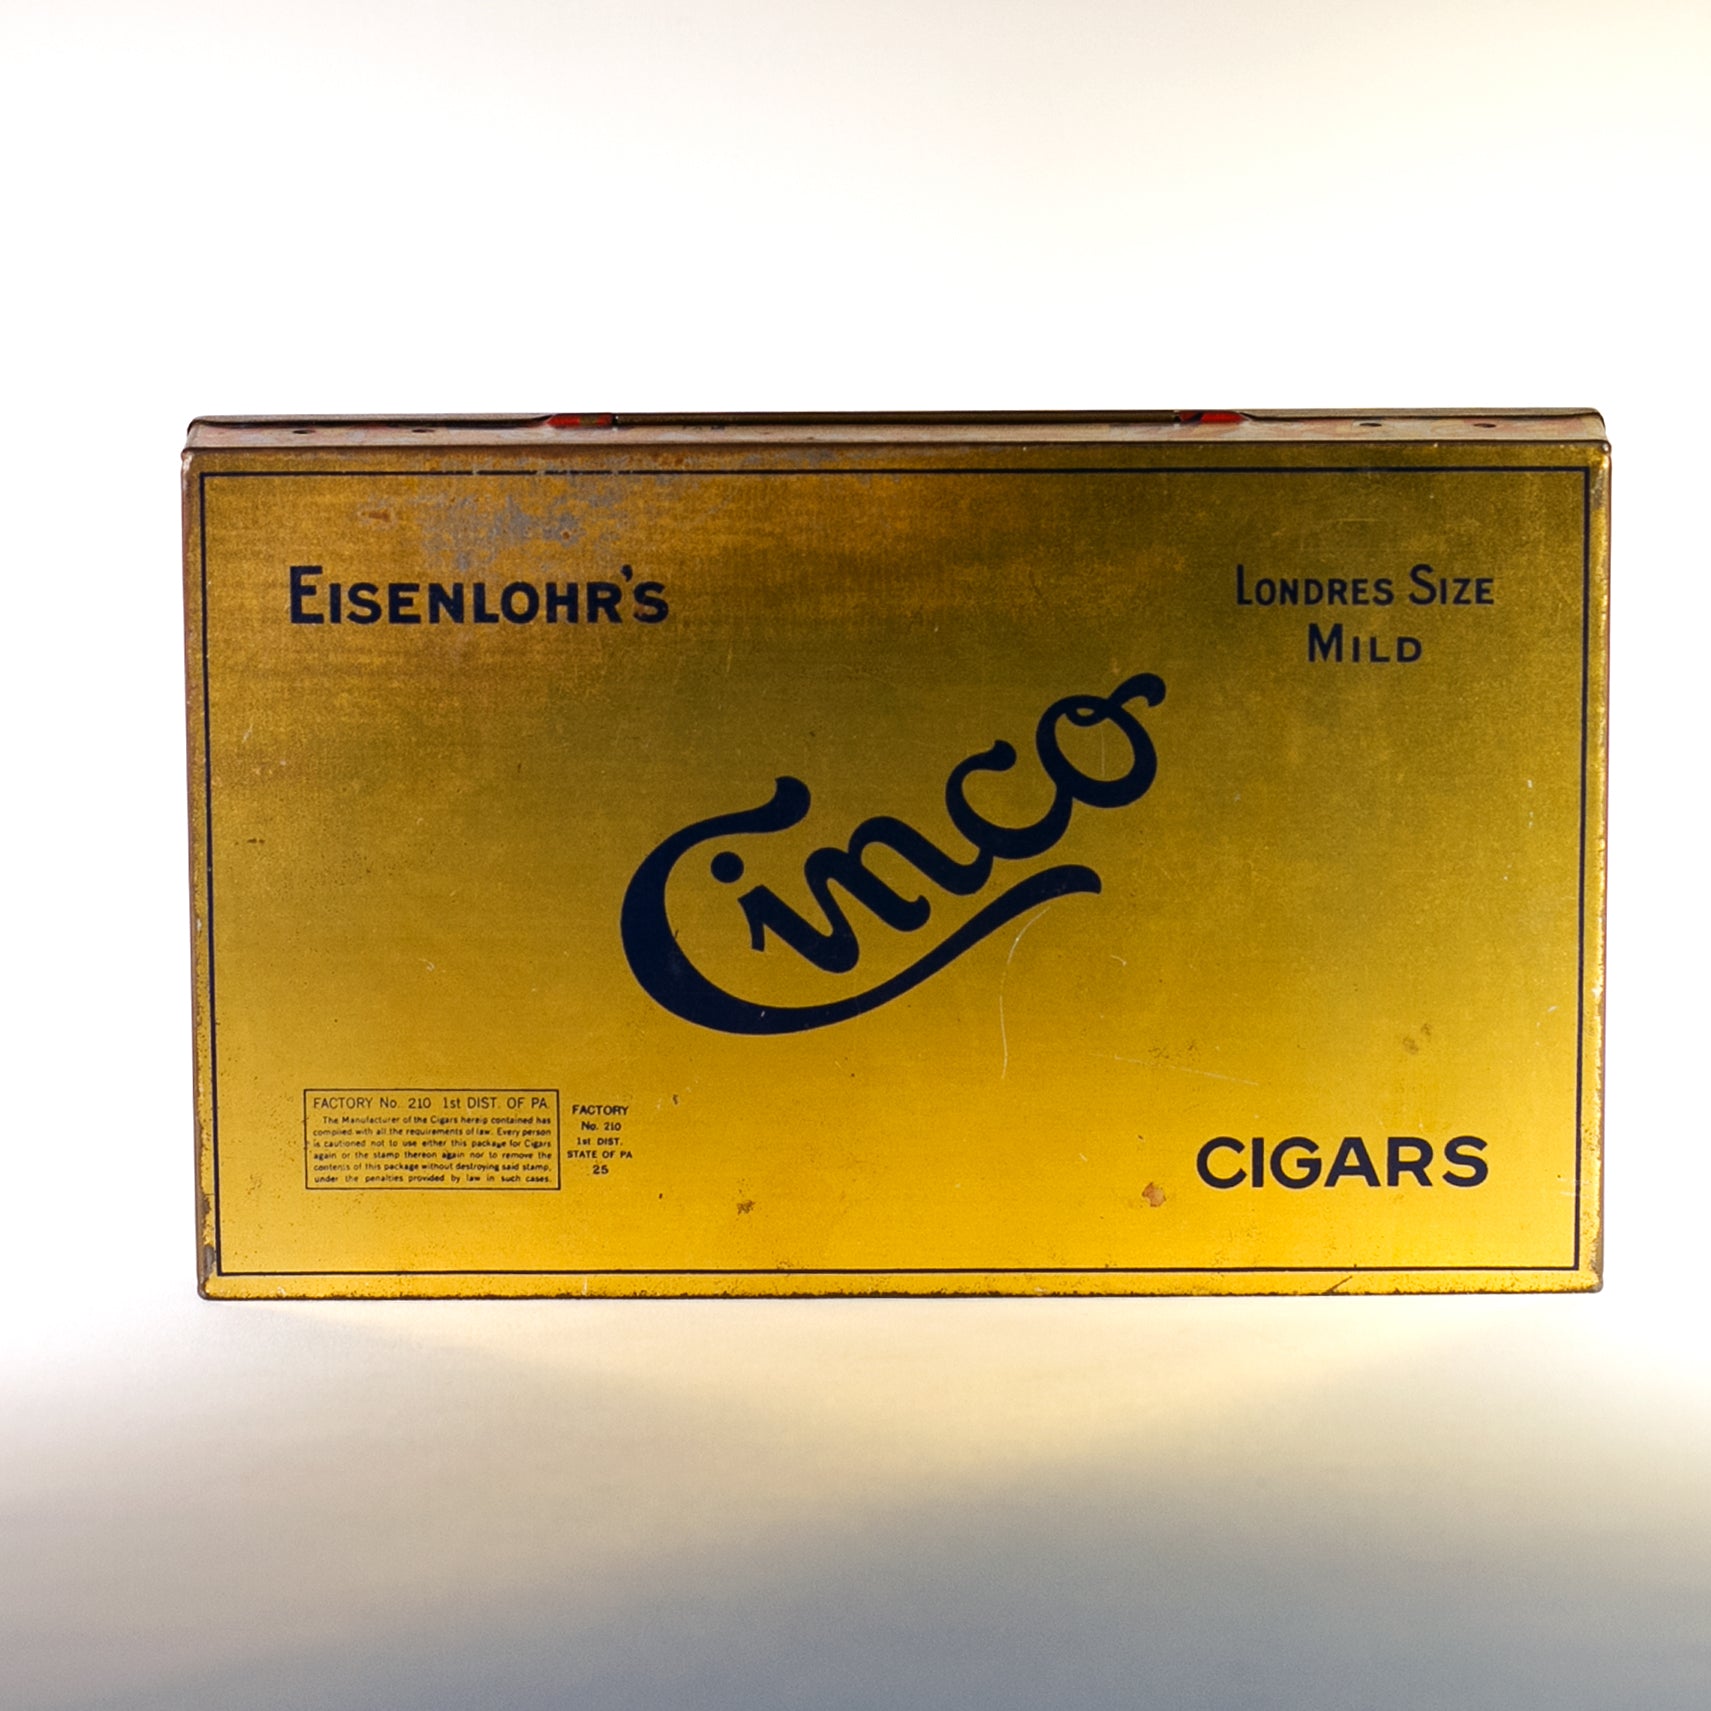 EISENLOHR'S CINCO CIGARS TIN is from the 1920s. Cinco was the chief product of the Philadelphia based cigar firm of Otto Eisenlohr and Brothers, a popular priced brand in the 1920s, producing and selling 210 million of the cigars. The brand was considered the largest individual seller of cigars in the United States. 